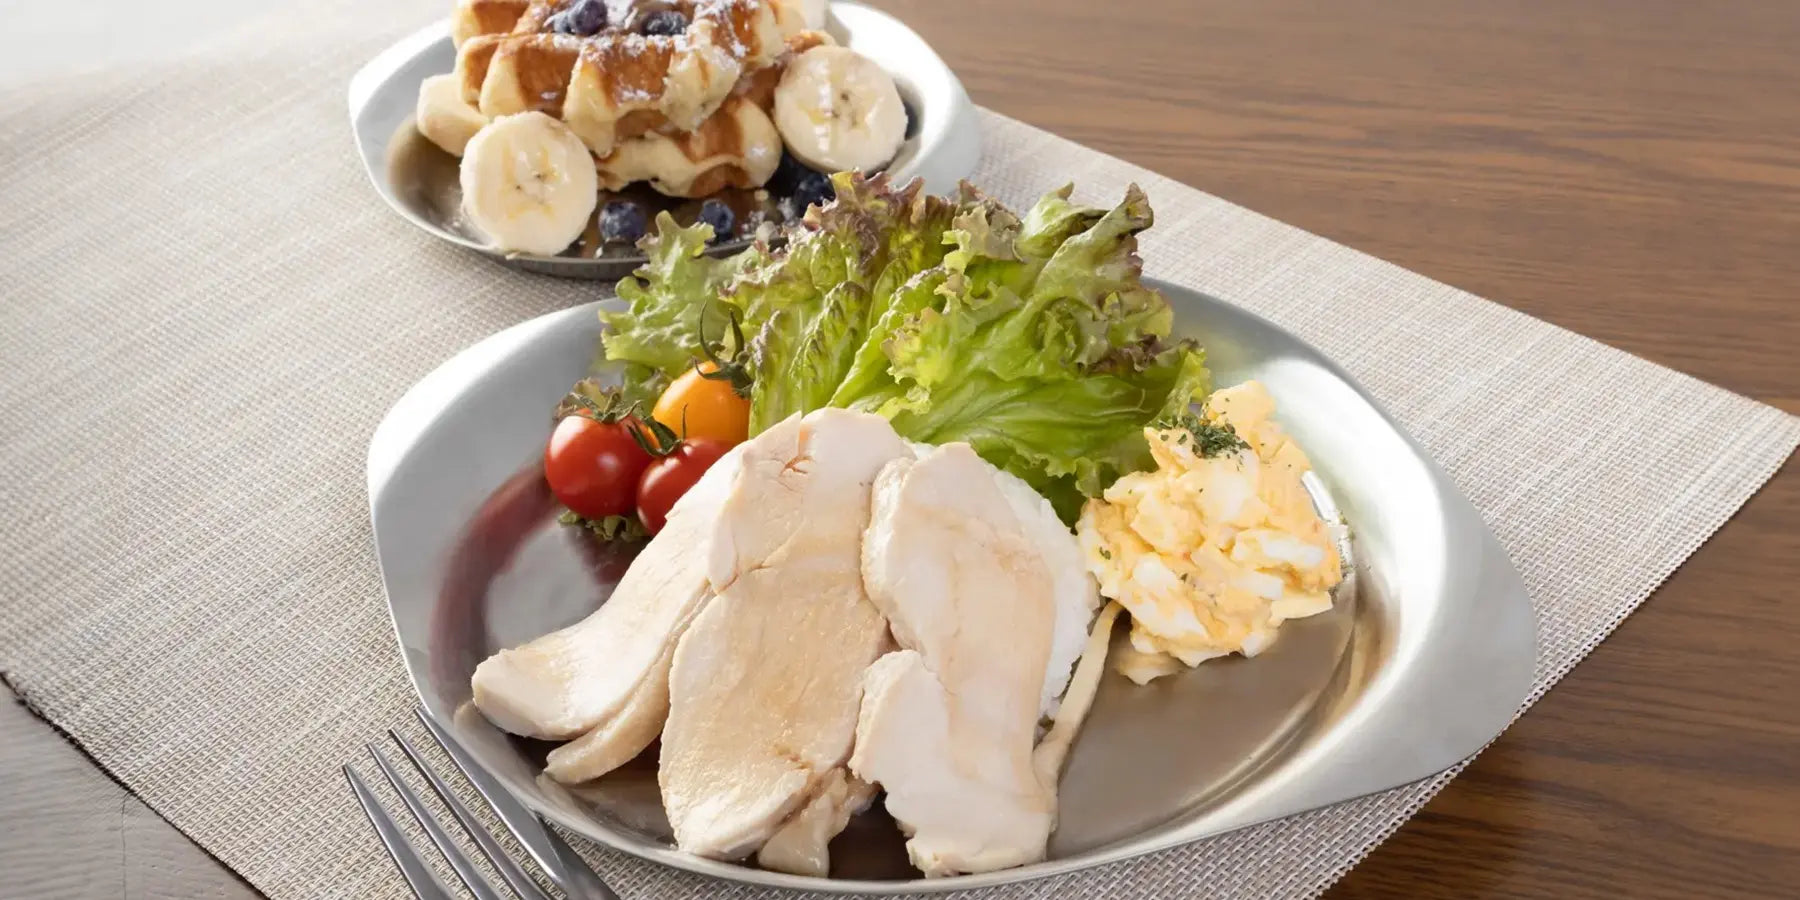 Discover our great selection of Serving Platters at Globalkitchen Japan.